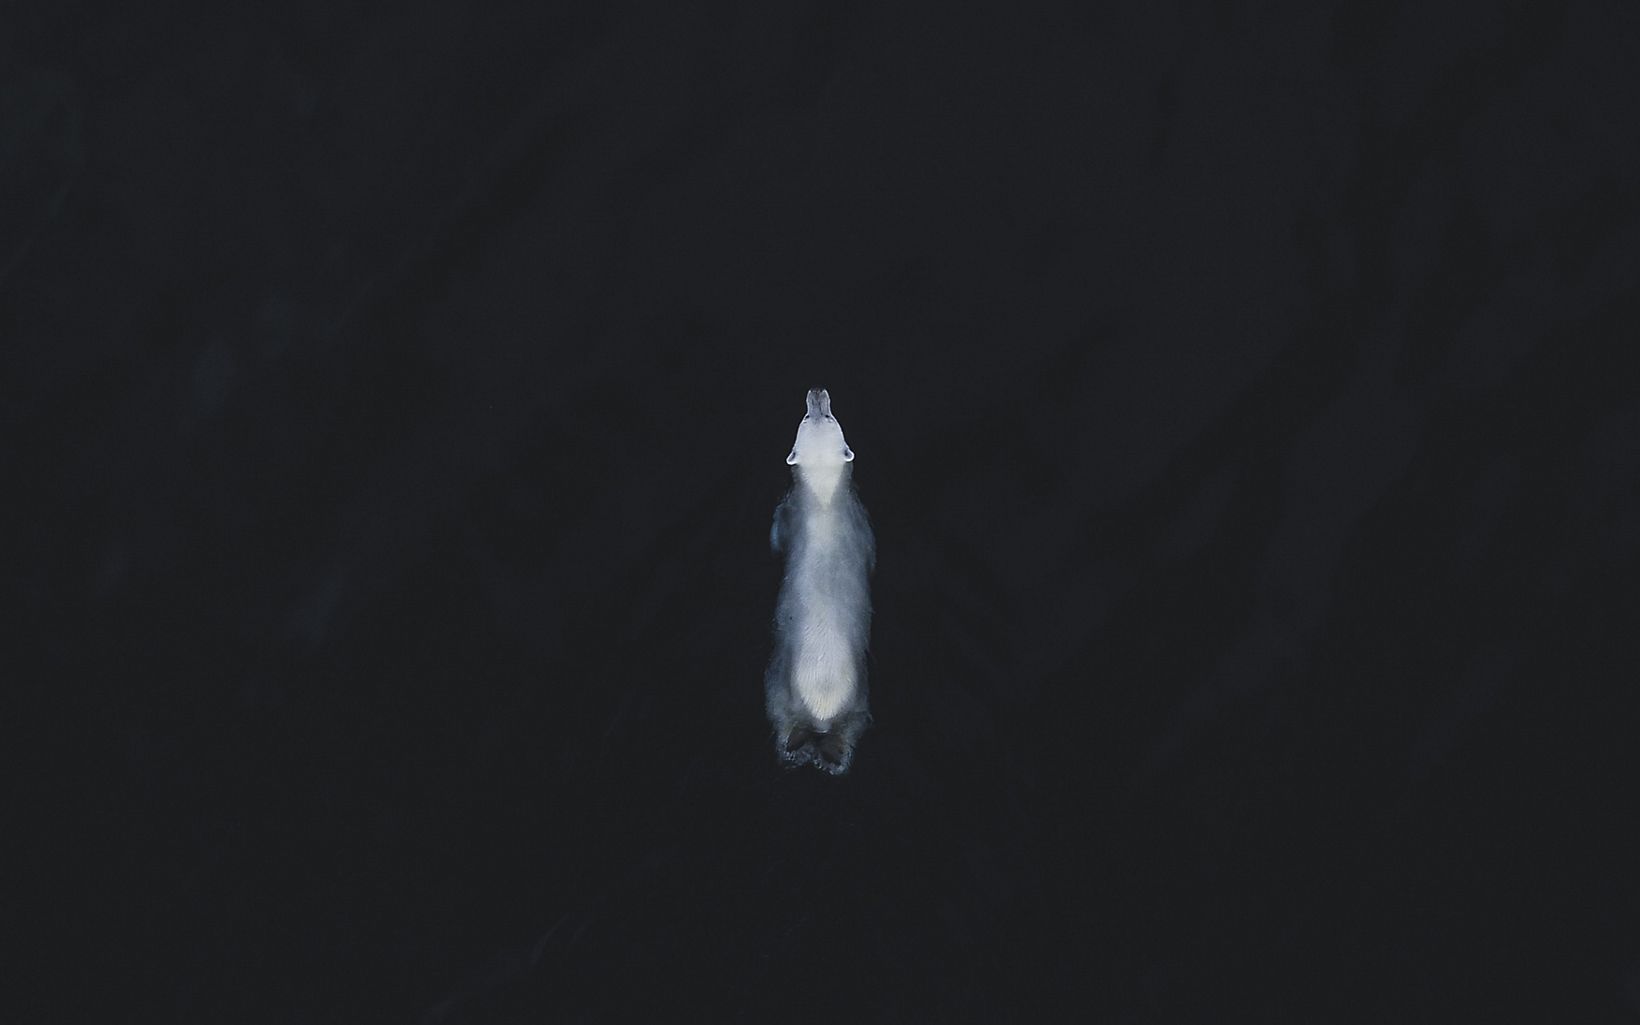 Single polar bear swimming at the surface of the dark waters.